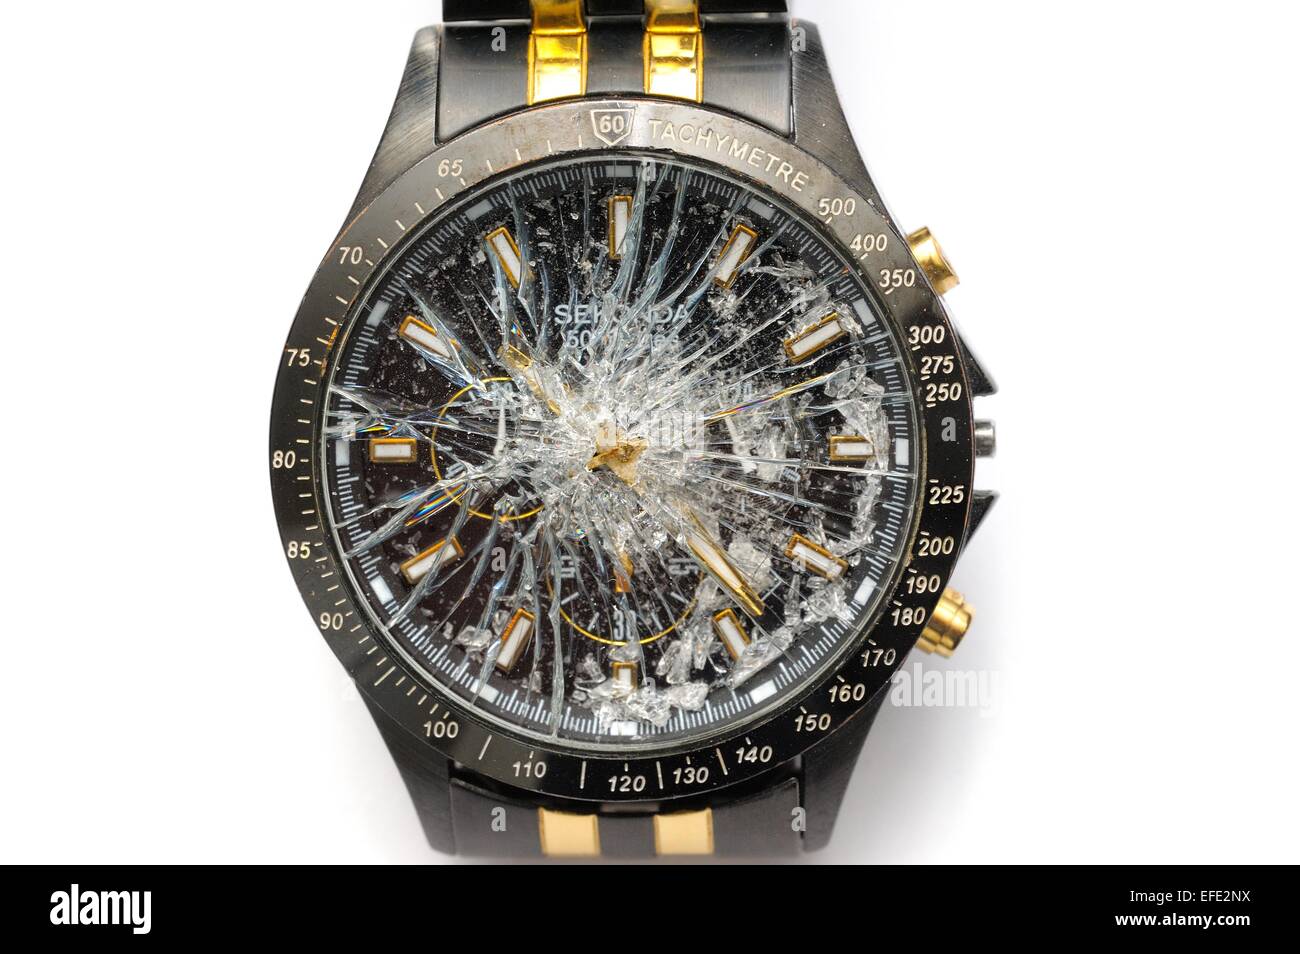 What To Do When My Watch Crystal Breaks